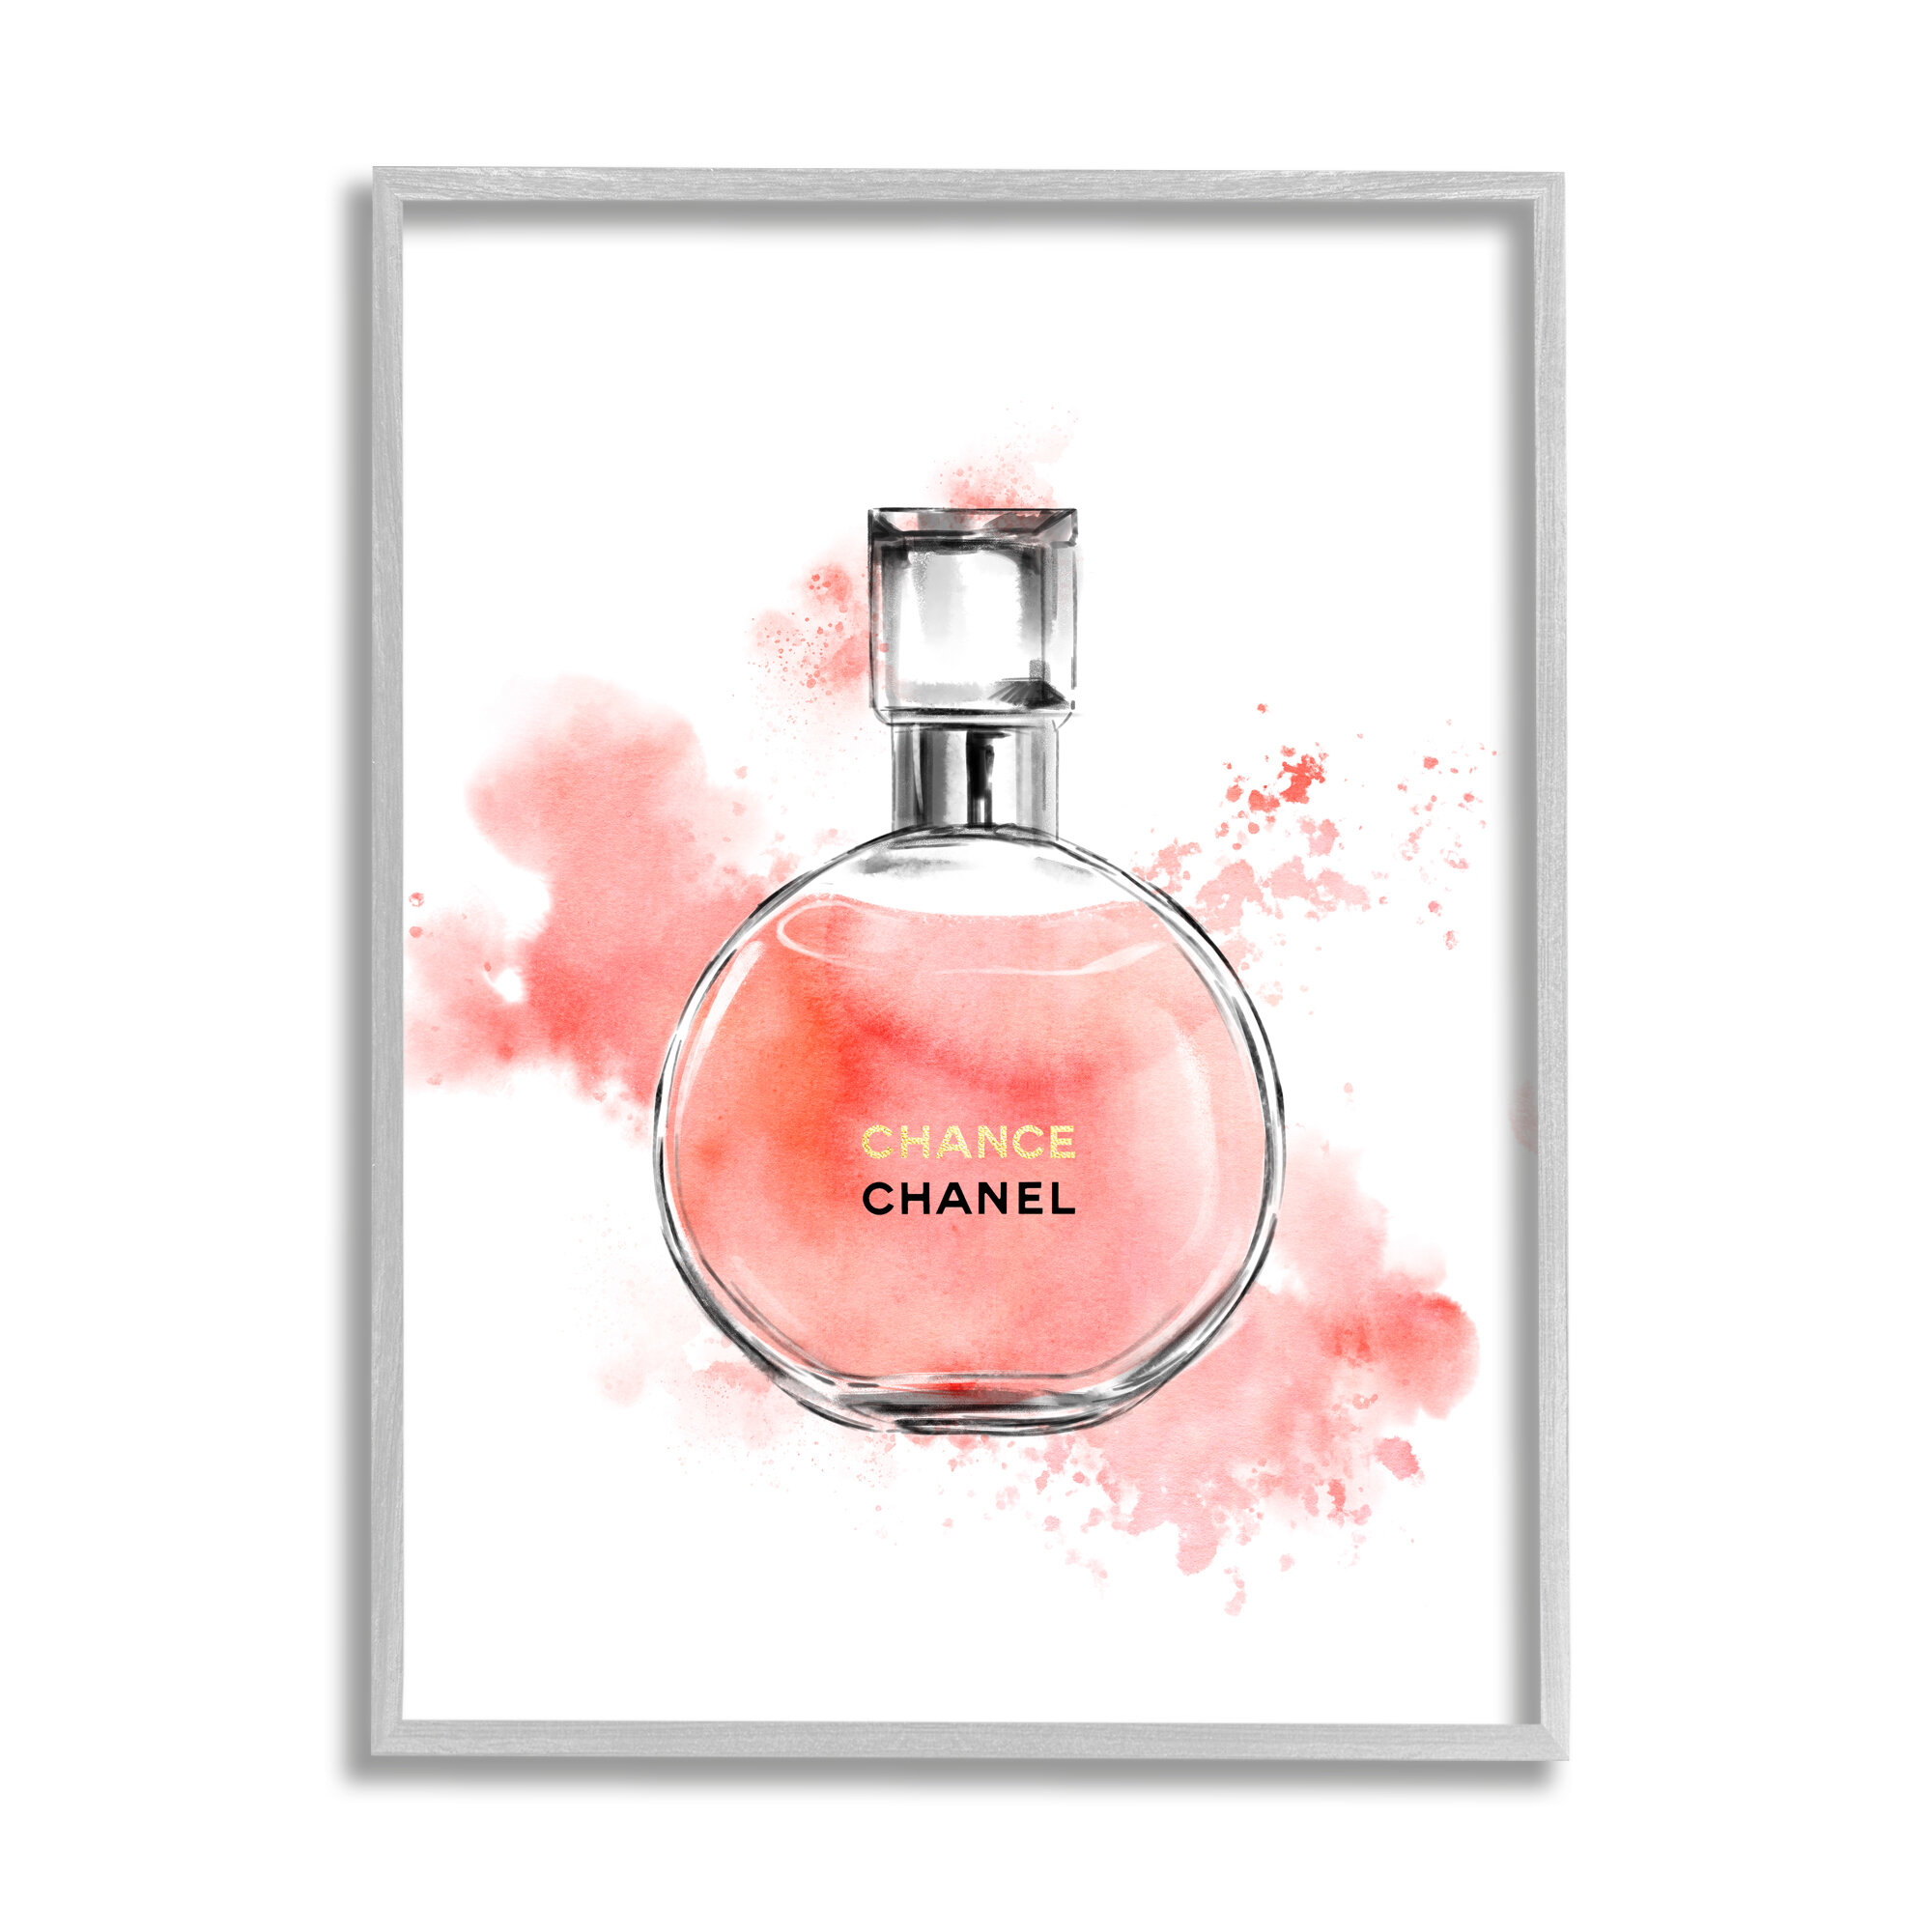 Pink Fashion Watercolor Cosmetic Perfume Bottle Designer Glam Gray Farmhouse Oversized Rustic Framed Giclee Texturized Art by Ziwei Li Everly Quinn Si